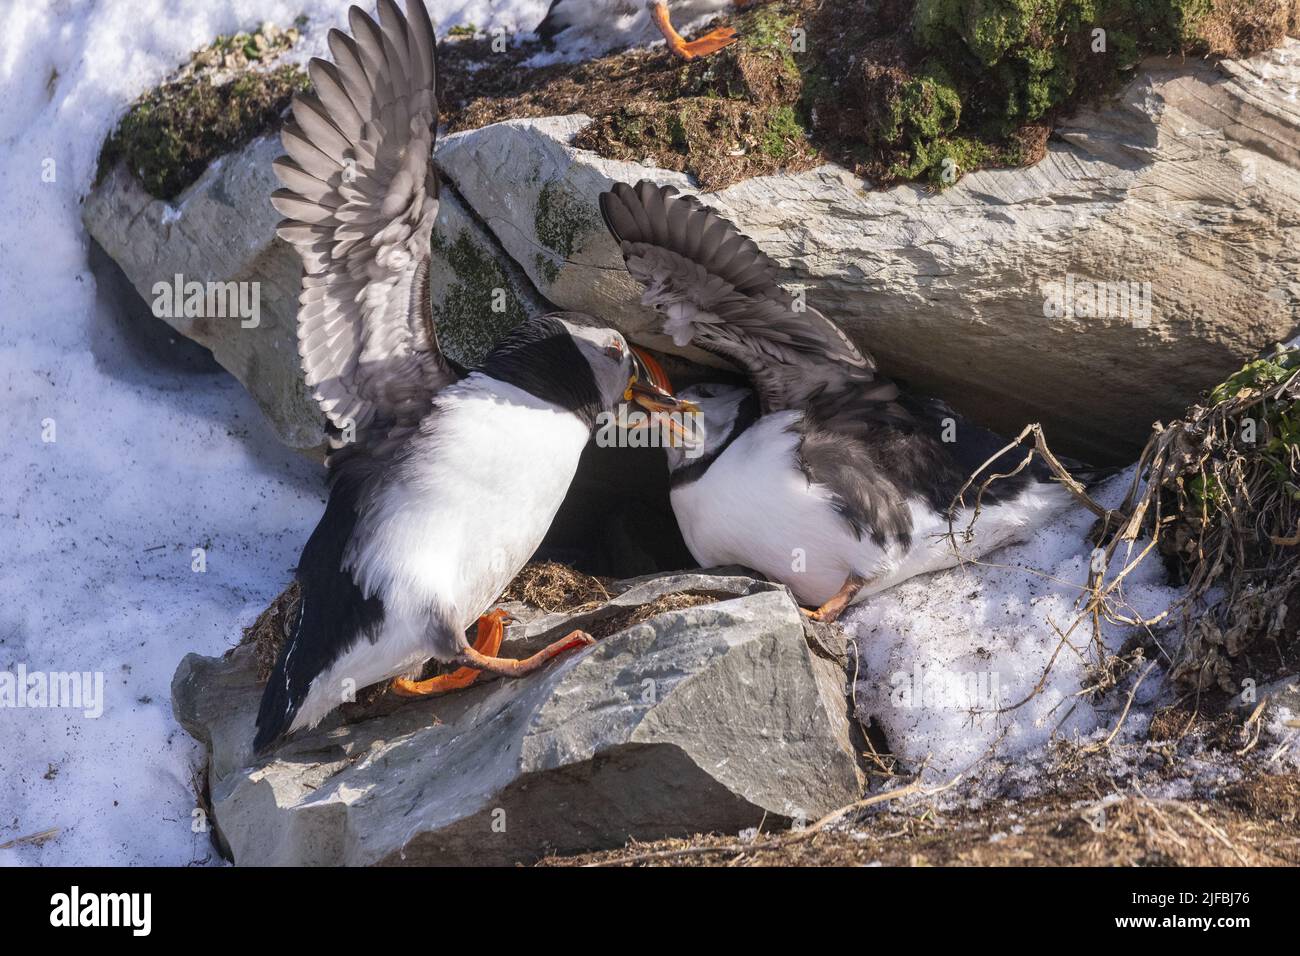 Norway, Varanger Fjord, Vardø or Vardo, Island of Hornøya, protected island with large colonies of seabirds, Atlantic Puffin (Fratercula arctica), fight n the snow Stock Photo